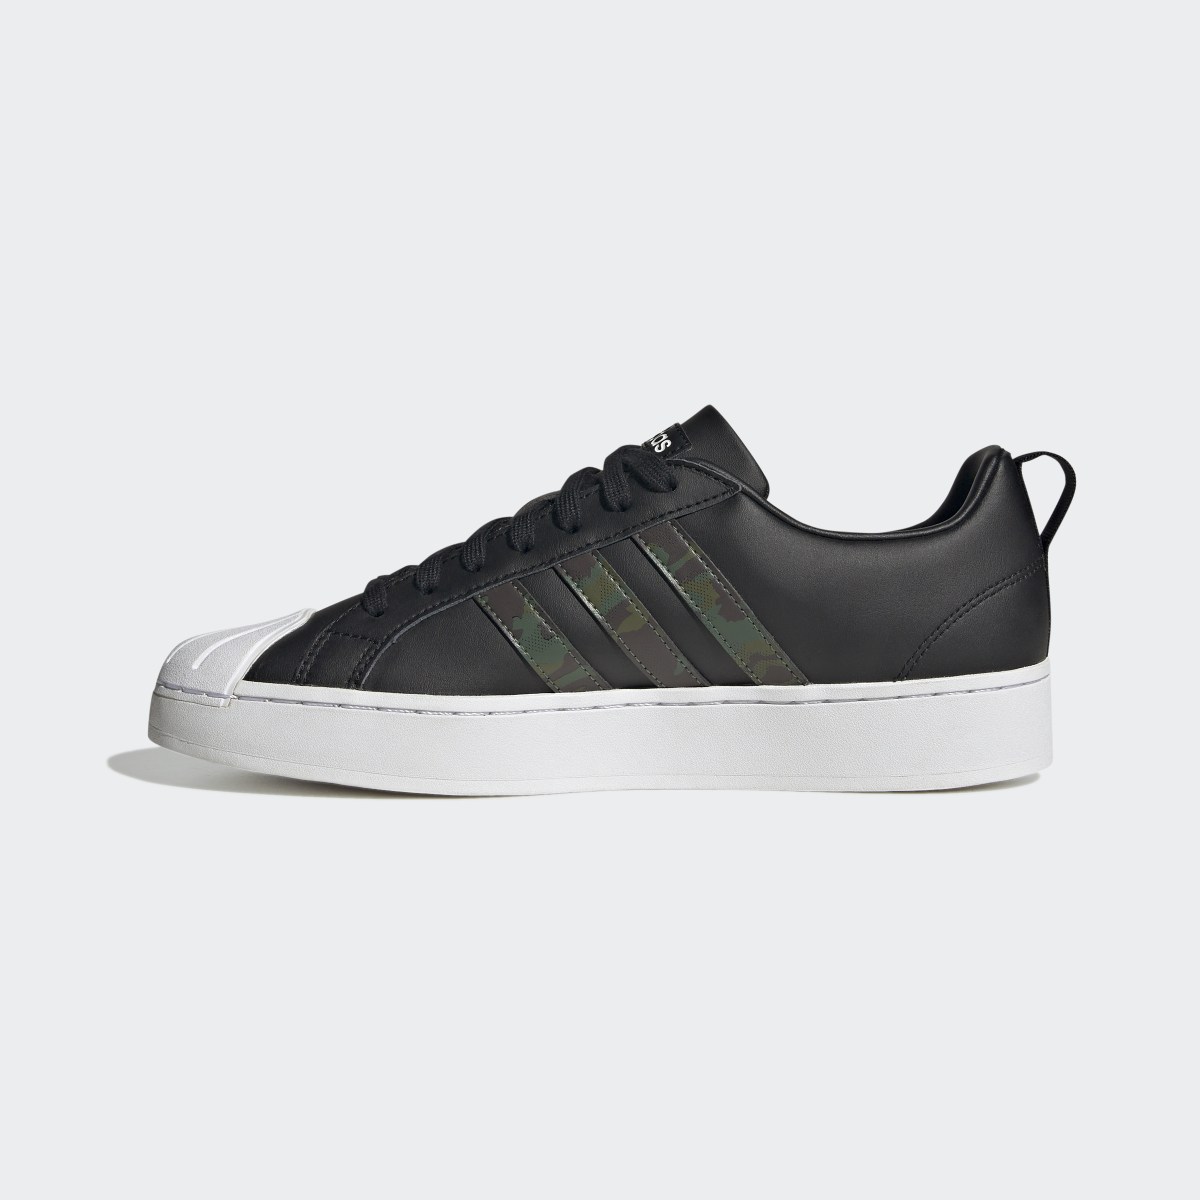 Adidas Streetcheck Cloudfoam Lifestyle Basketball Low Court Camo Graphic Shoes. 7